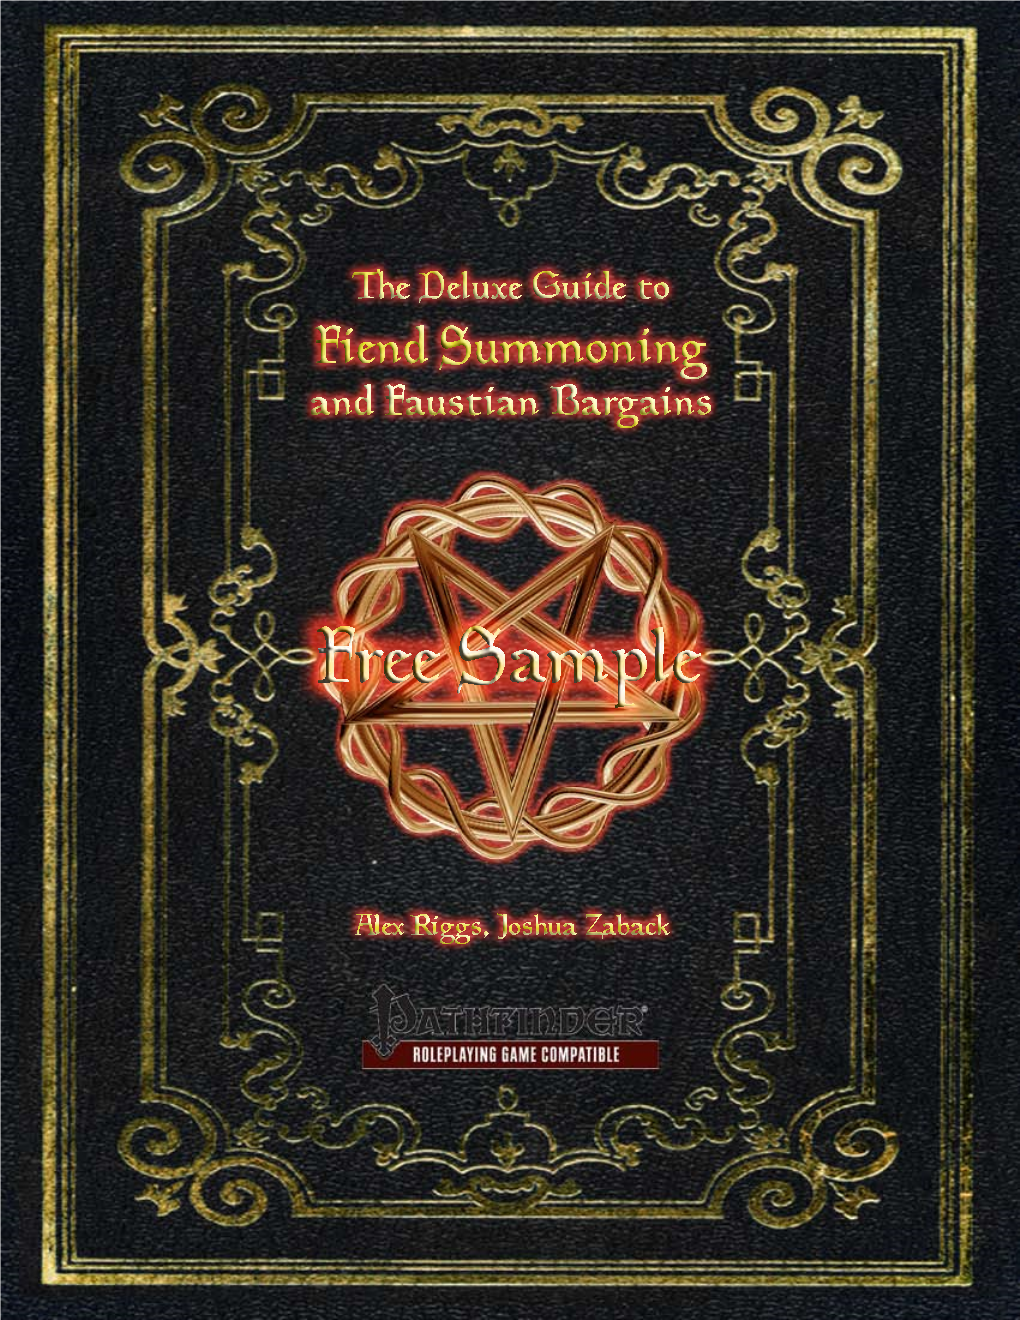 Free Demo of the Deluxe Guide to Fiend Summoning and Faustian Bargains.Pdf